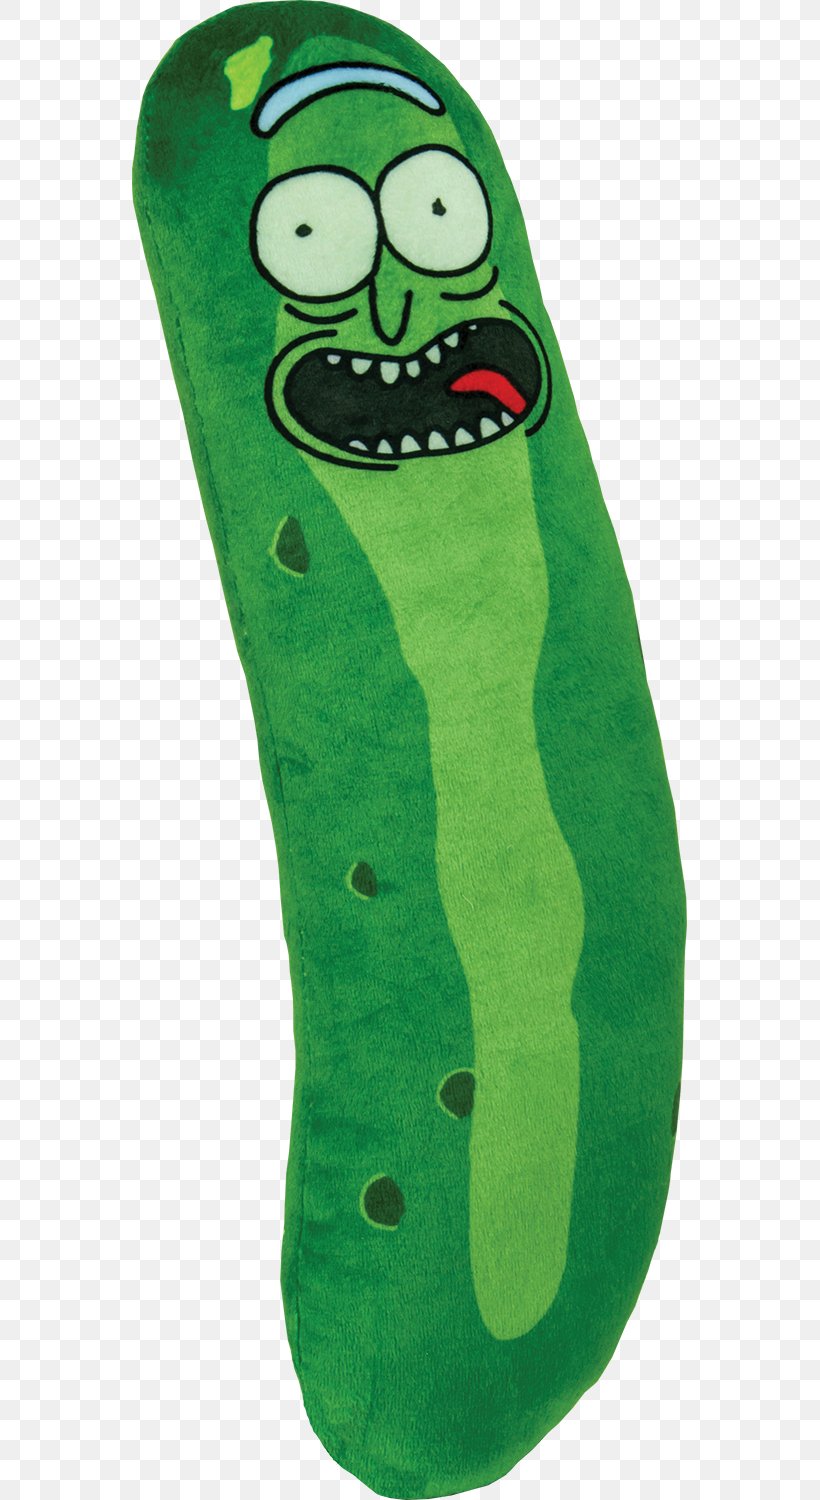 Rick and Morty Pickle Rick Plush Toy Cucumber Rick Figure 